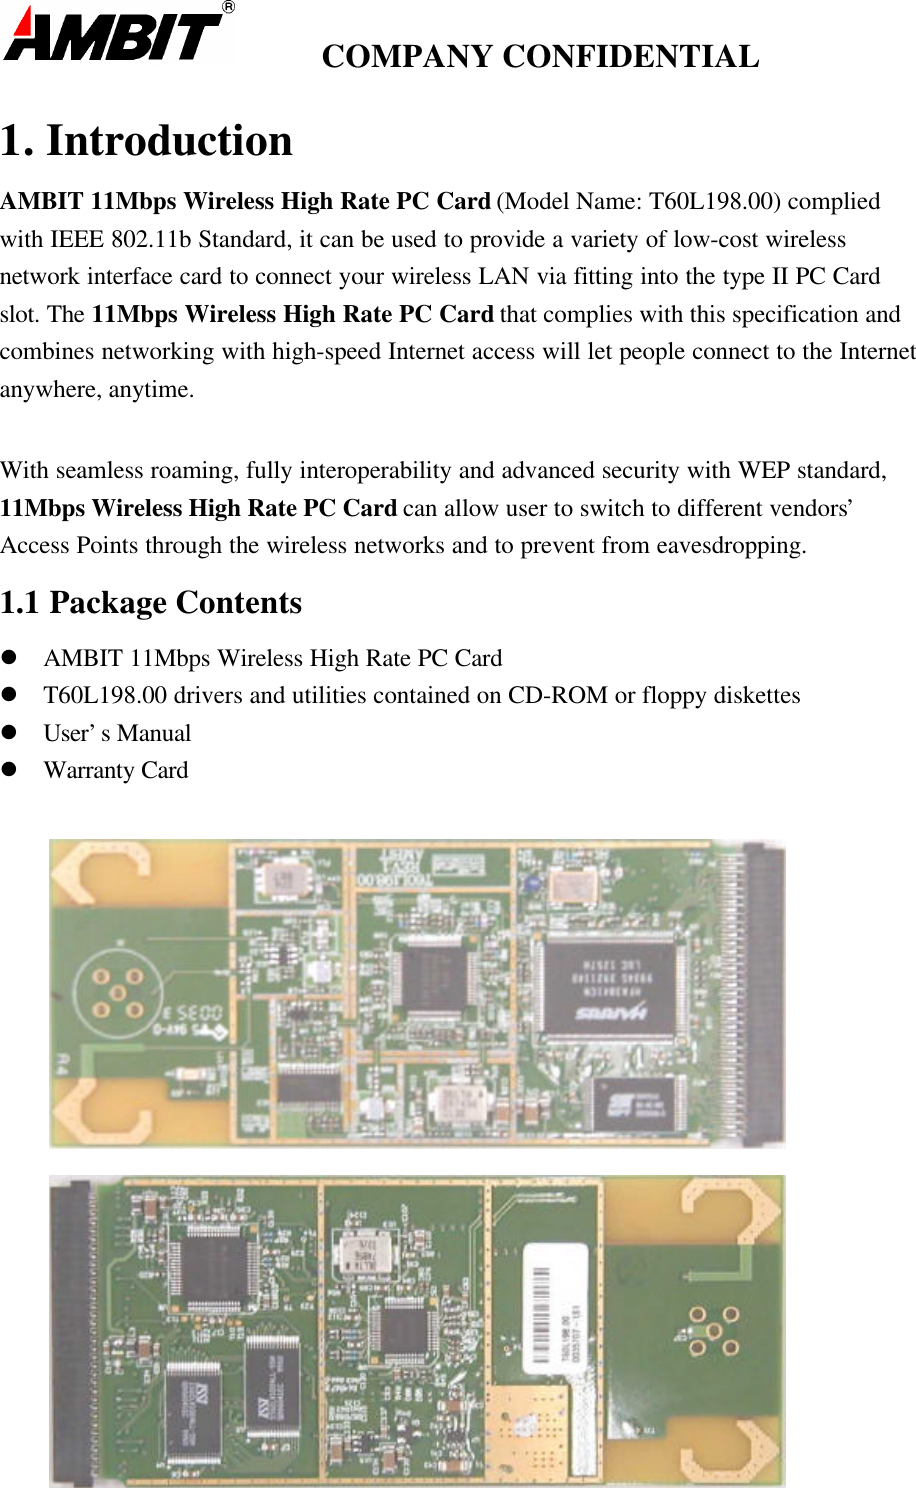         COMPANY CONFIDENTIAL1. IntroductionAMBIT 11Mbps Wireless High Rate PC Card (Model Name: T60L198.00) compliedwith IEEE 802.11b Standard, it can be used to provide a variety of low-cost wirelessnetwork interface card to connect your wireless LAN via fitting into the type II PC Cardslot. The 11Mbps Wireless High Rate PC Card that complies with this specification andcombines networking with high-speed Internet access will let people connect to the Internetanywhere, anytime.With seamless roaming, fully interoperability and advanced security with WEP standard,11Mbps Wireless High Rate PC Card can allow user to switch to different vendors’Access Points through the wireless networks and to prevent from eavesdropping.1.1 Package Contentsl AMBIT 11Mbps Wireless High Rate PC Cardl T60L198.00 drivers and utilities contained on CD-ROM or floppy diskettesl User’s Manuall Warranty Card